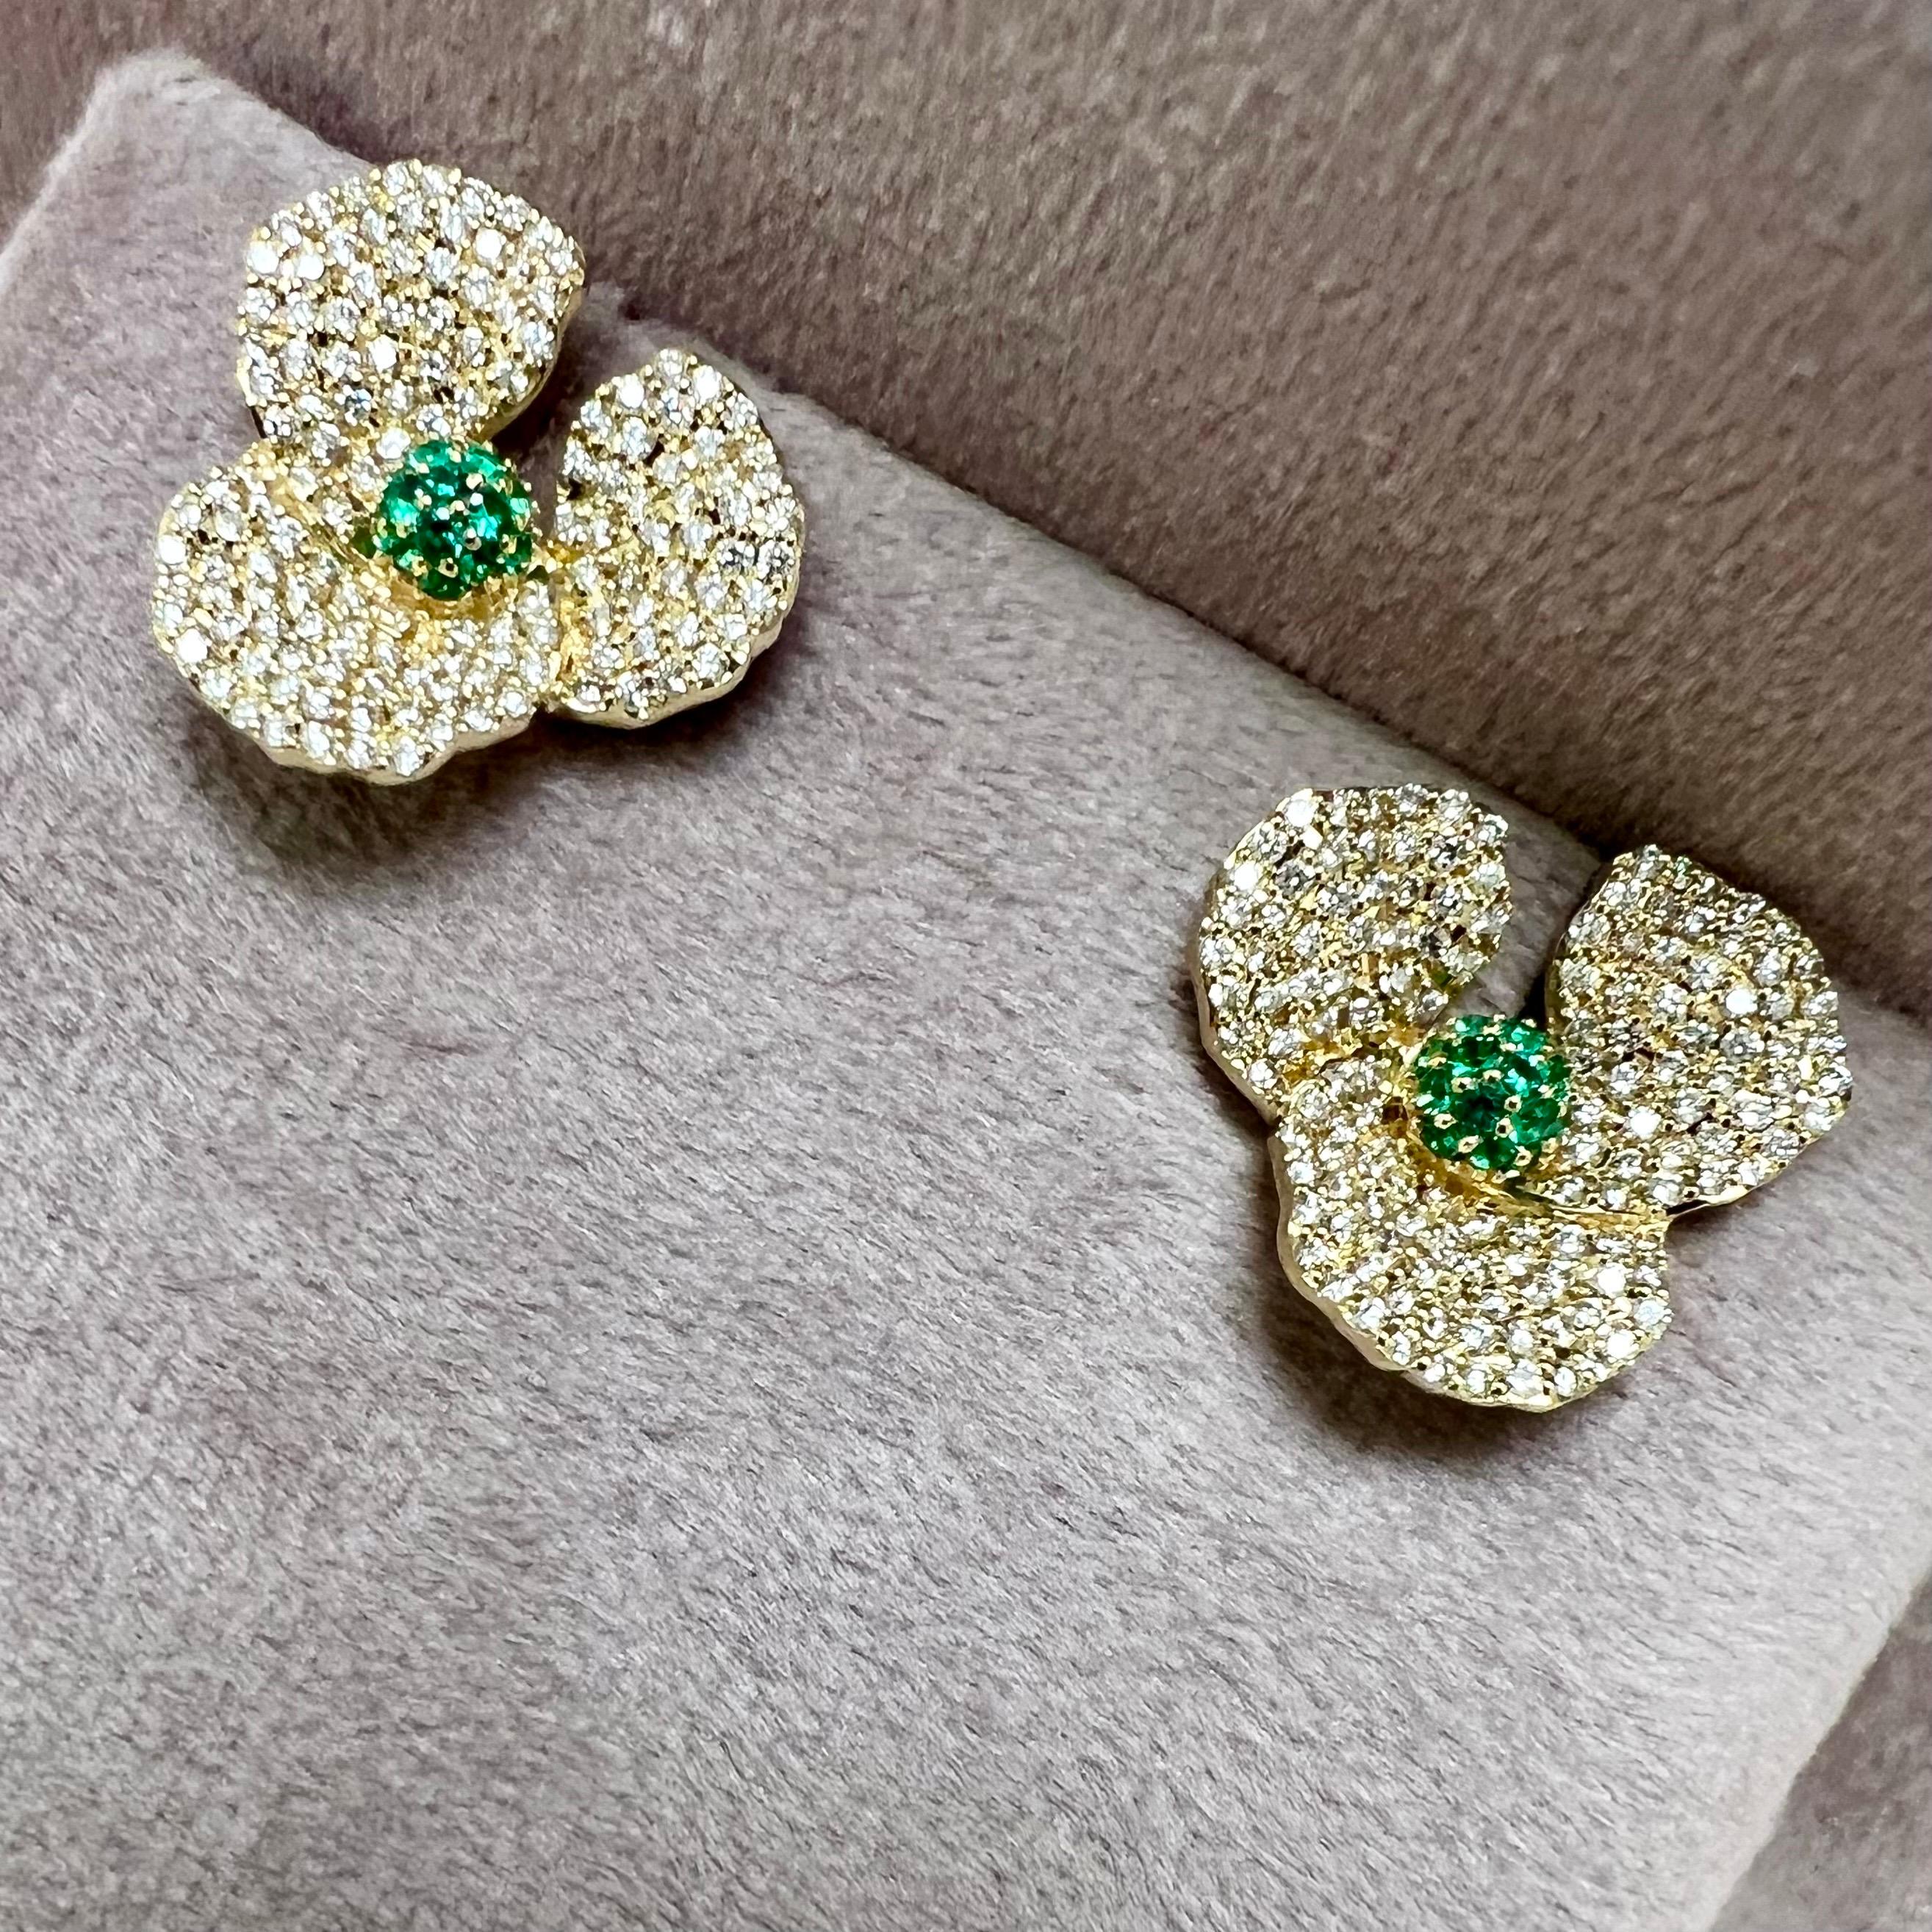 Created in 18 karat yellow gold
Emeralds 0.30 carat approx.
Diamonds 1.50 carats approx.
18kyg butterfly backs
Can be worn at different angles
Limited edition

Crafted with 18 karat yellow gold, these limited edition earrings feature emeralds (at